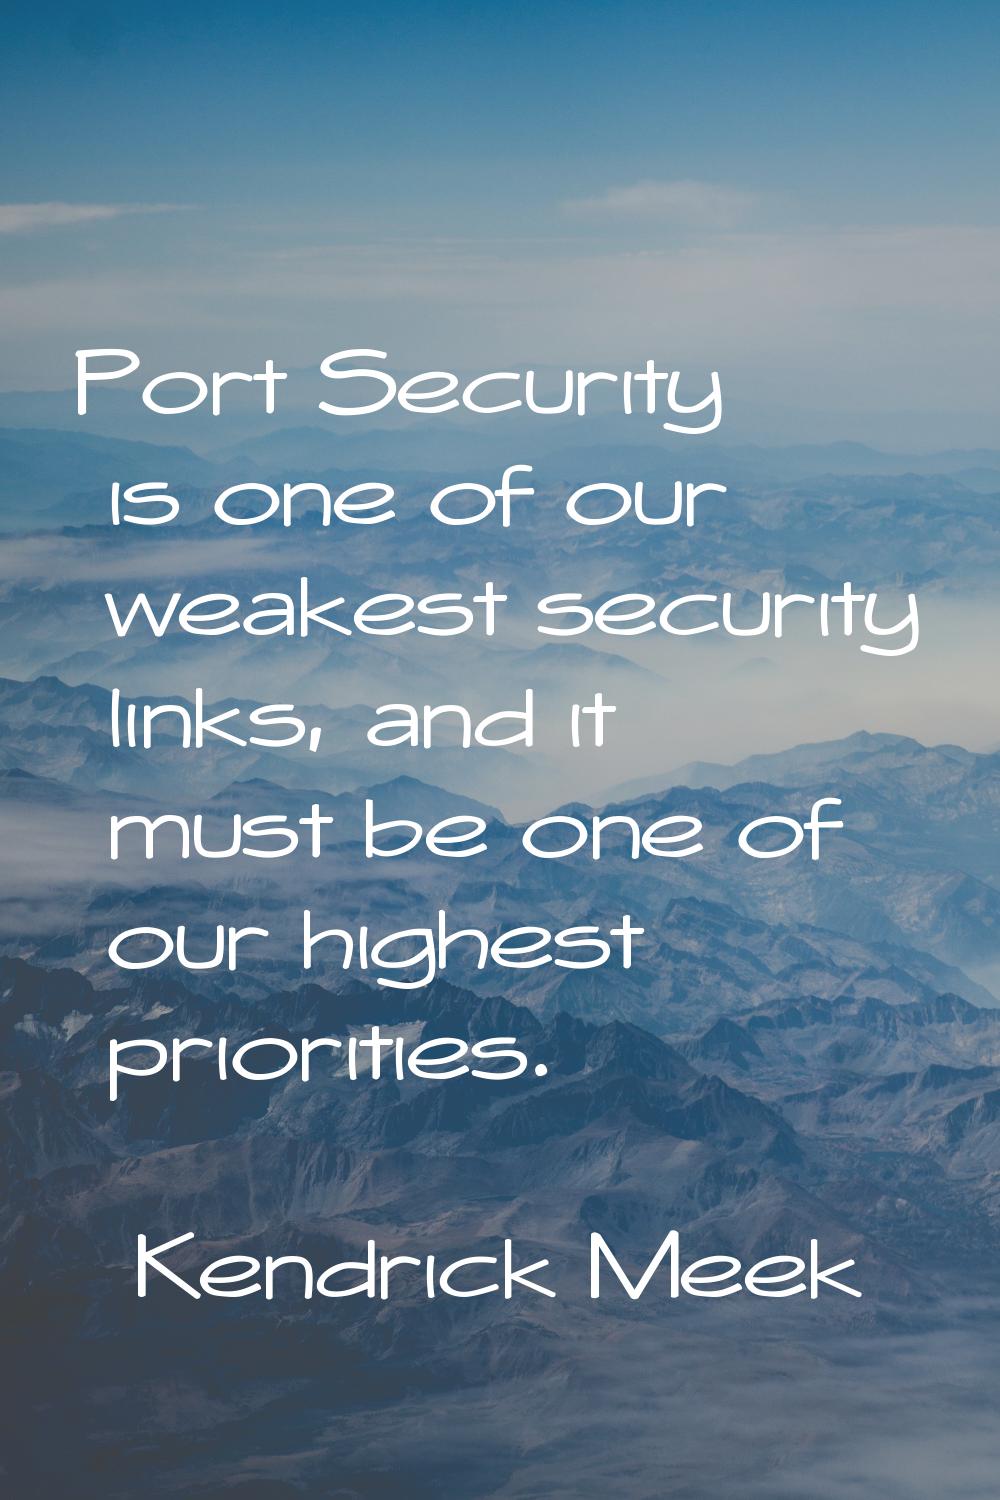 Port Security is one of our weakest security links, and it must be one of our highest priorities.